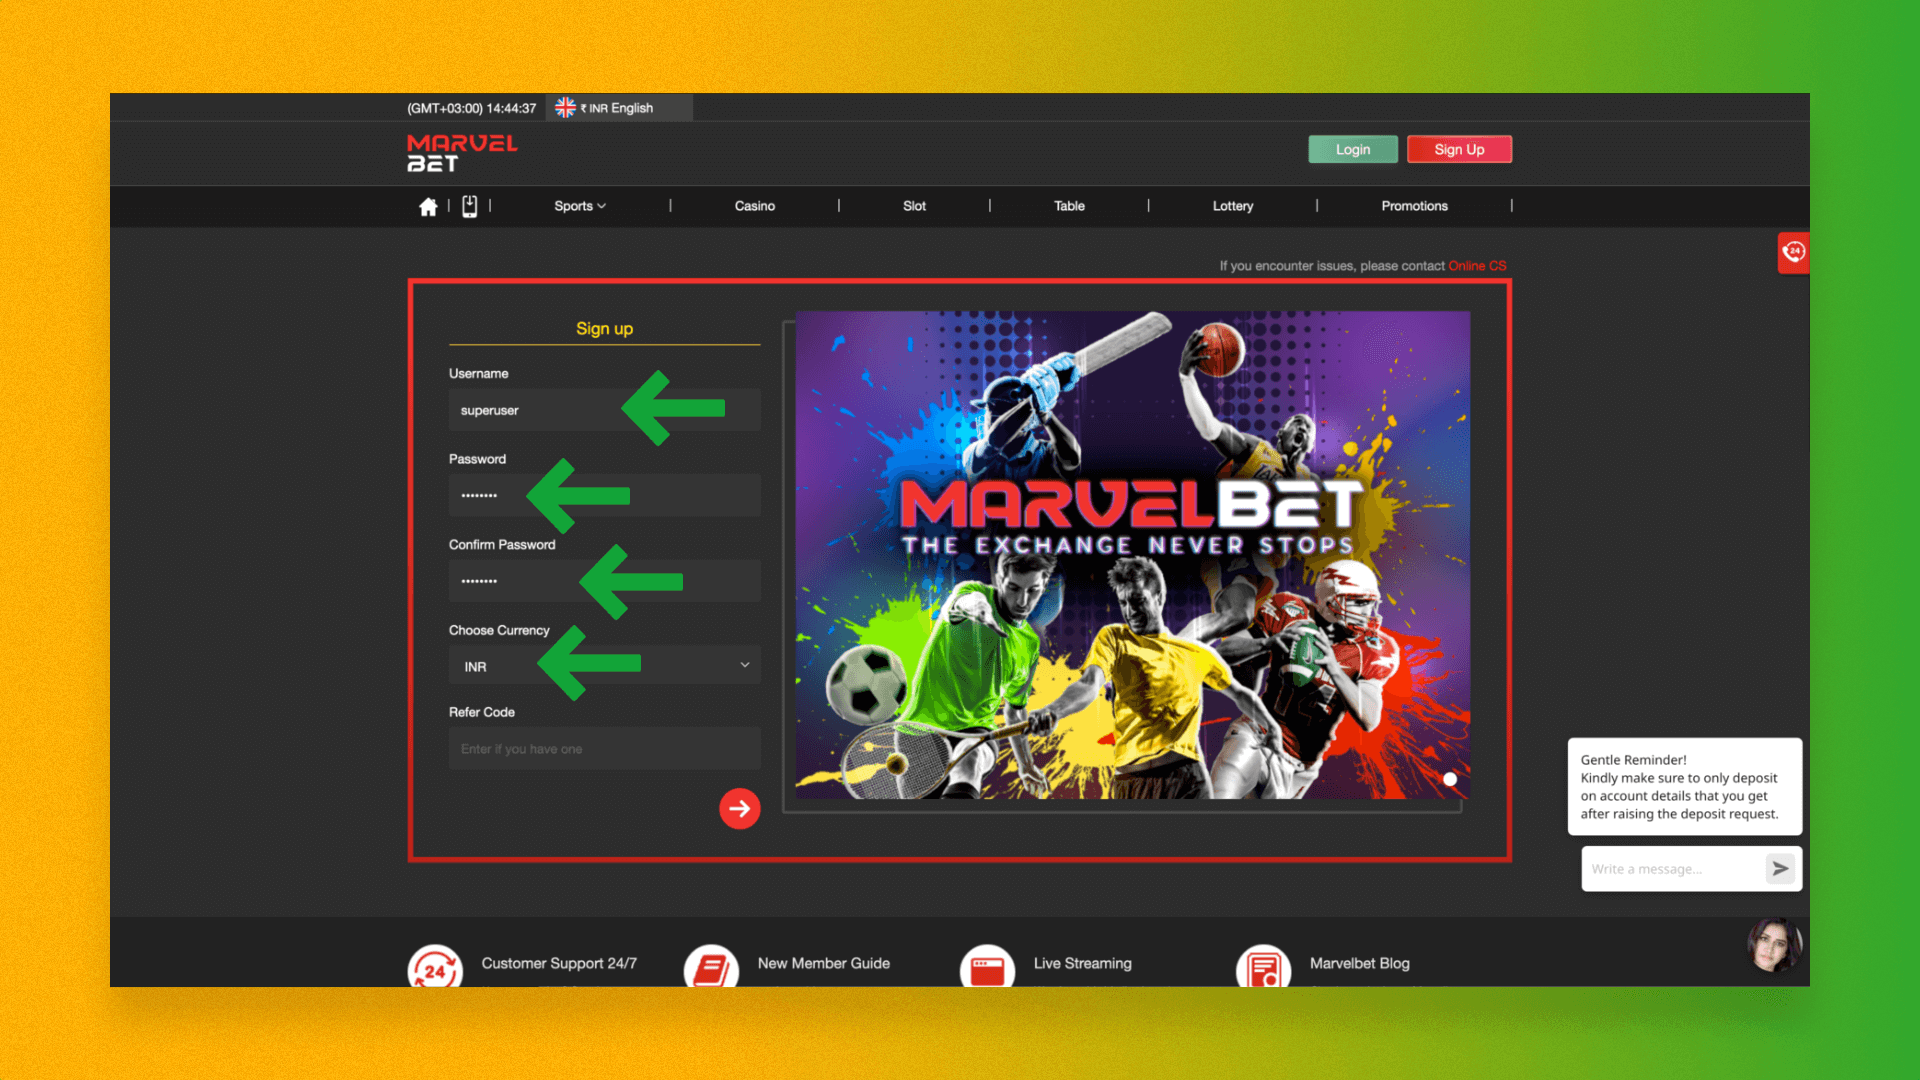 To create a Marvelbet account you need to register